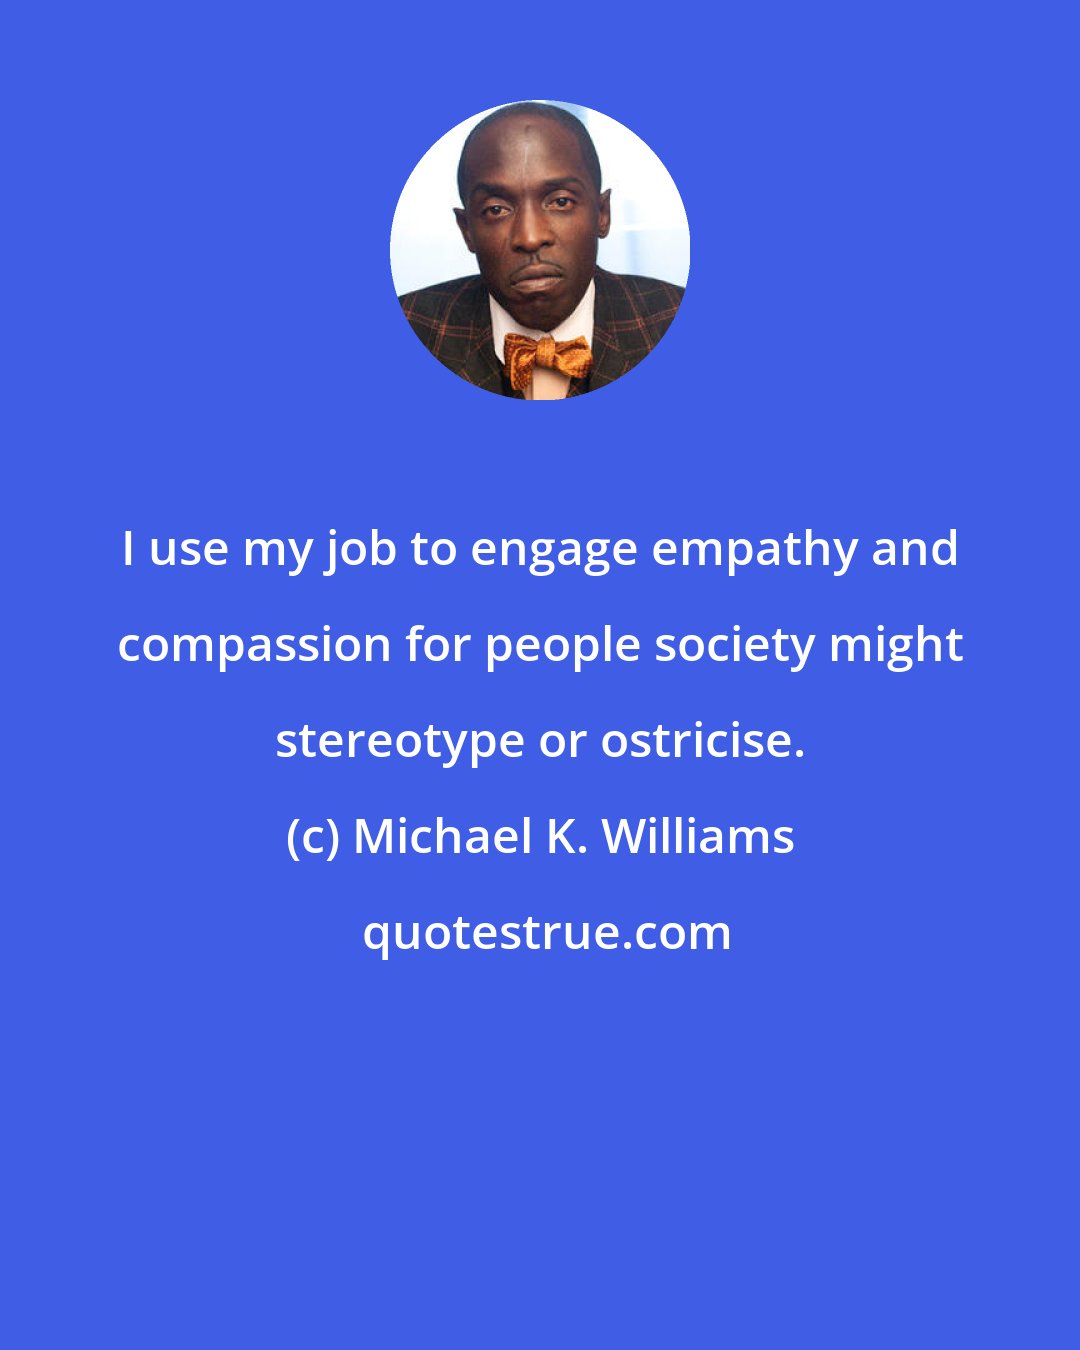 Michael K. Williams: I use my job to engage empathy and compassion for people society might stereotype or ostricise.